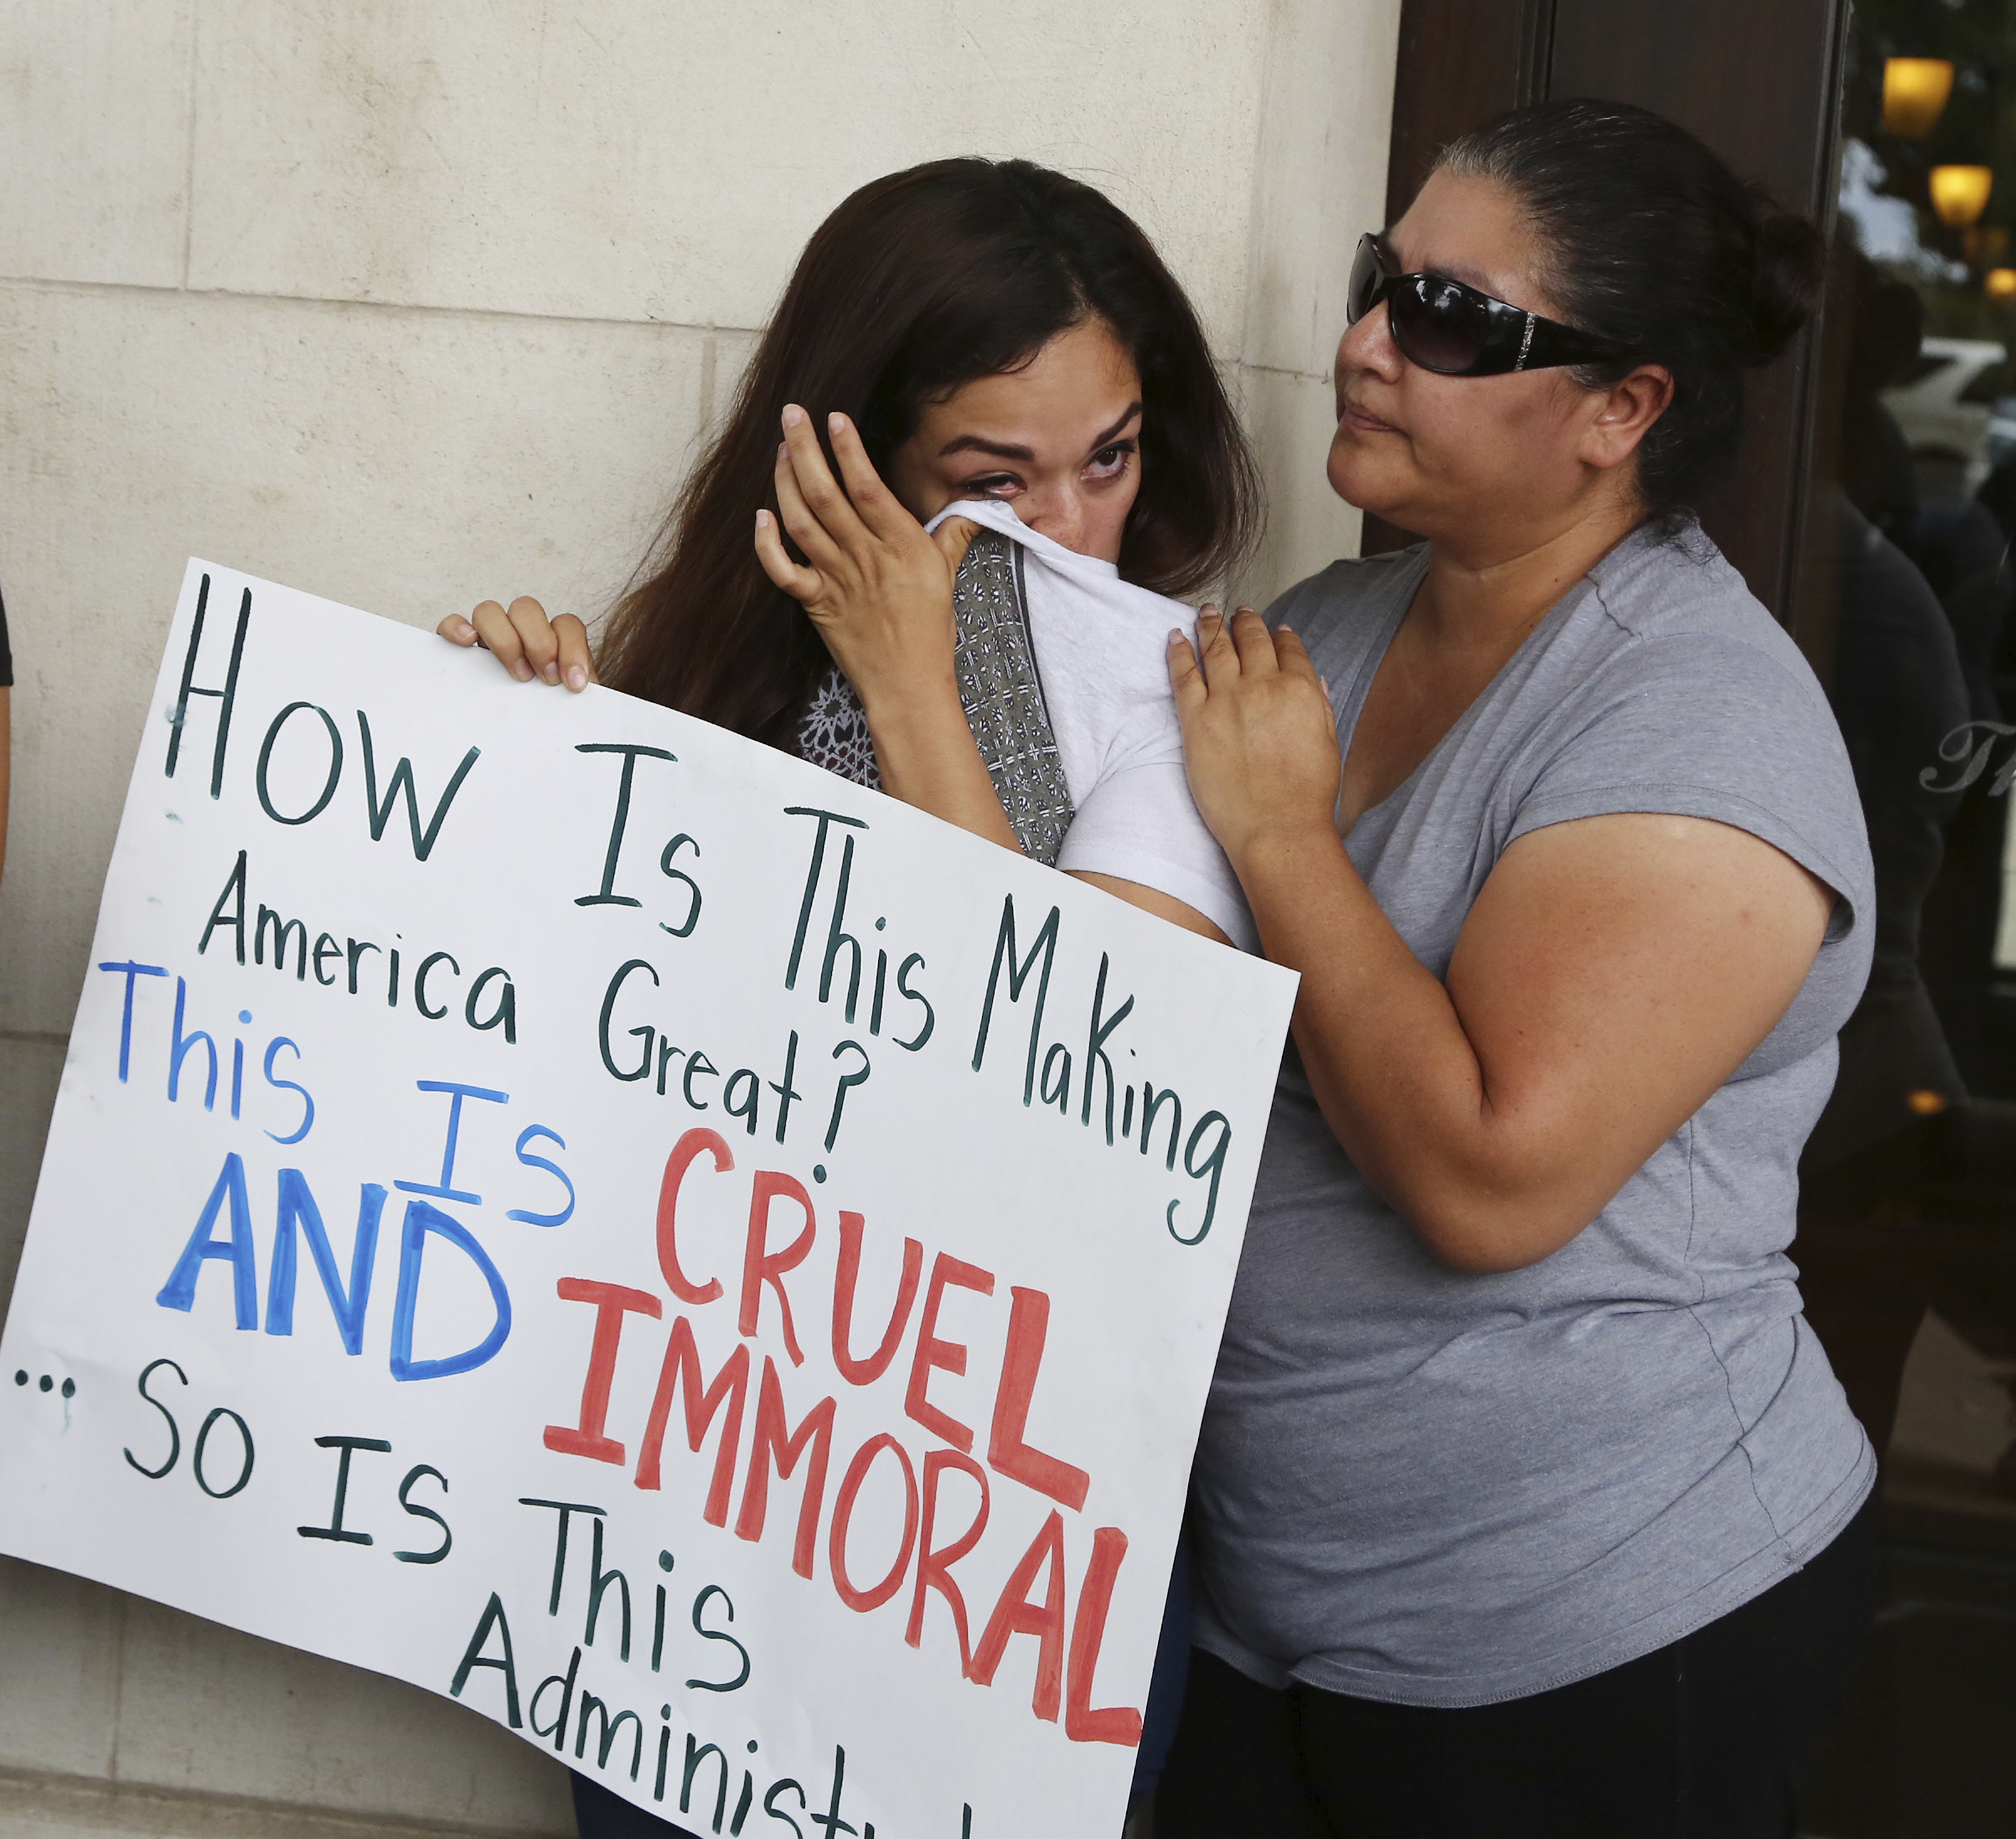 Adriana Sanchez, left, wipes a tear from her face as she is comforted by her mother, Rosalina De La Rosa, following a protest to end forced separation of children from their parents at the border in downtown Waco, Texas, Tuesday, June 19, 2018. (Rod Aydelotte/Waco Tribune-Herald via AP)